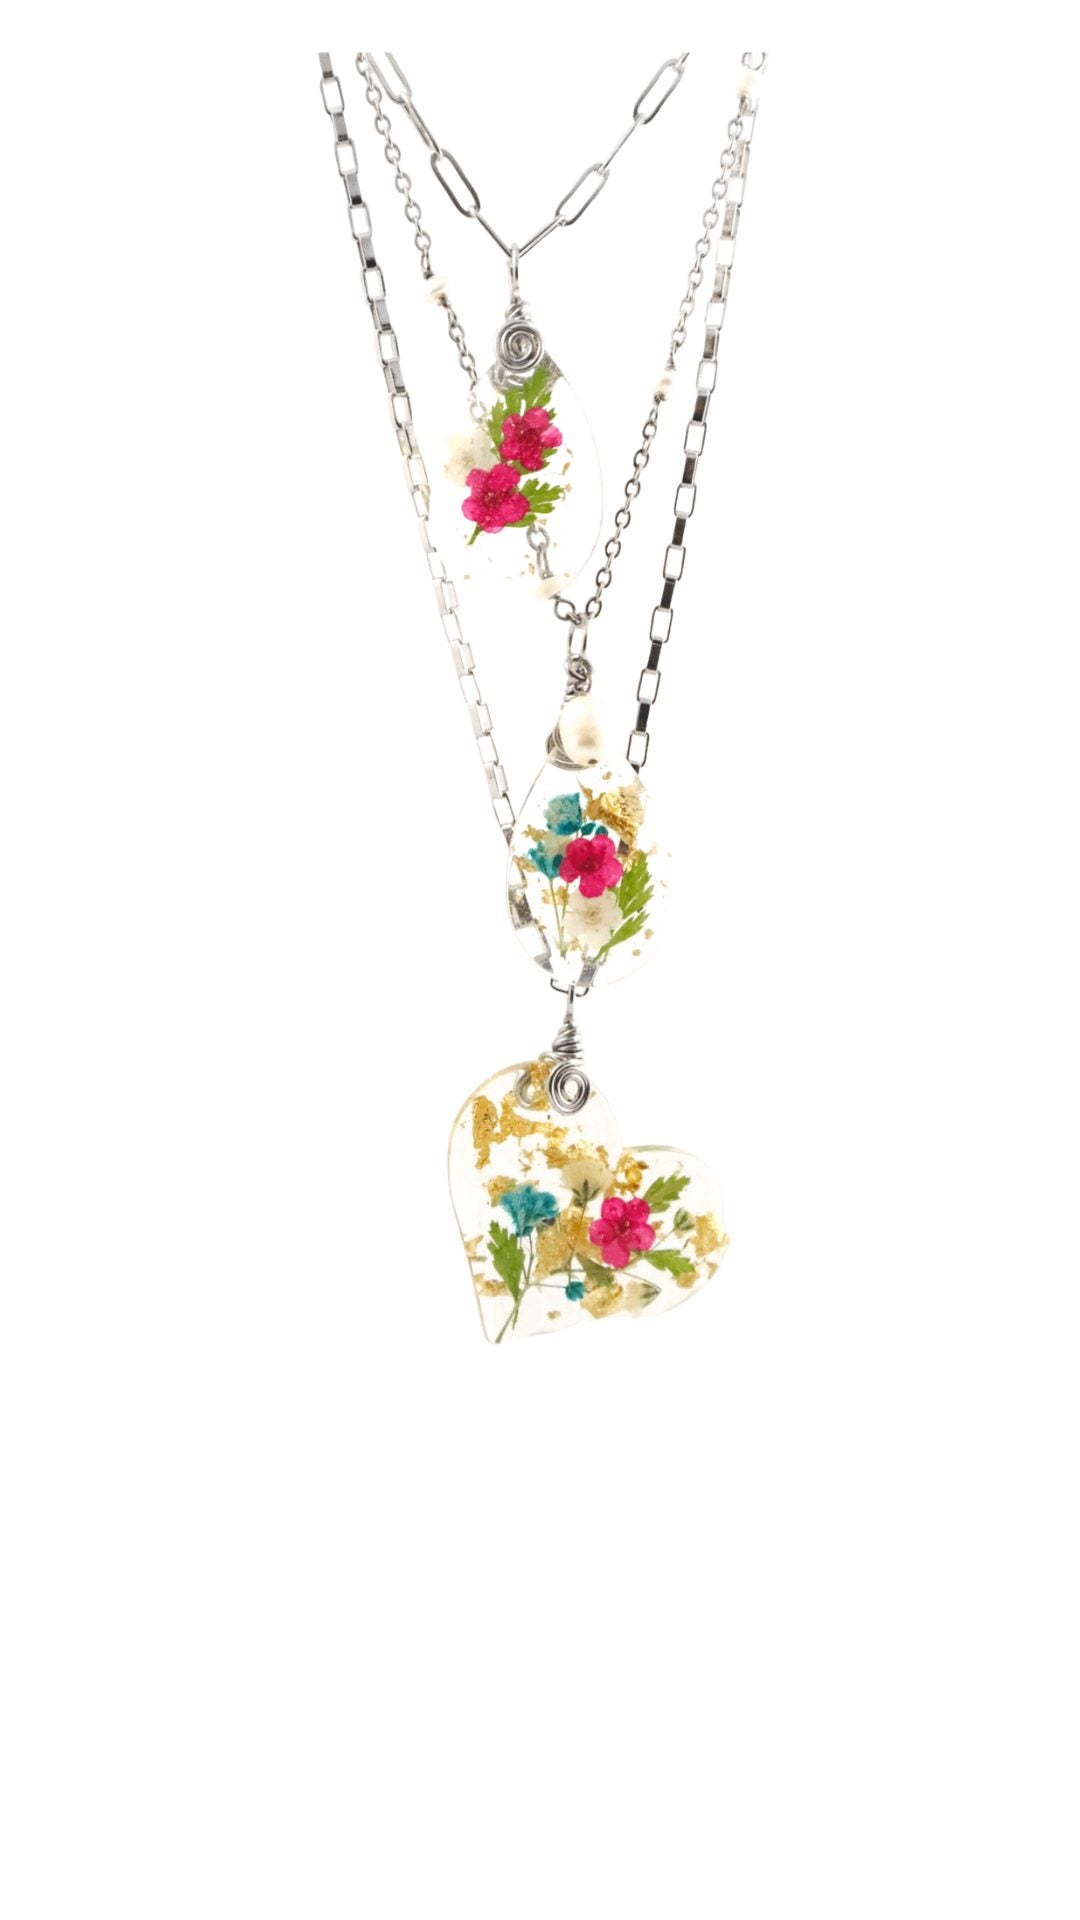 Pressed Flower Necklaces/Jewelry | Sunny Paige Co